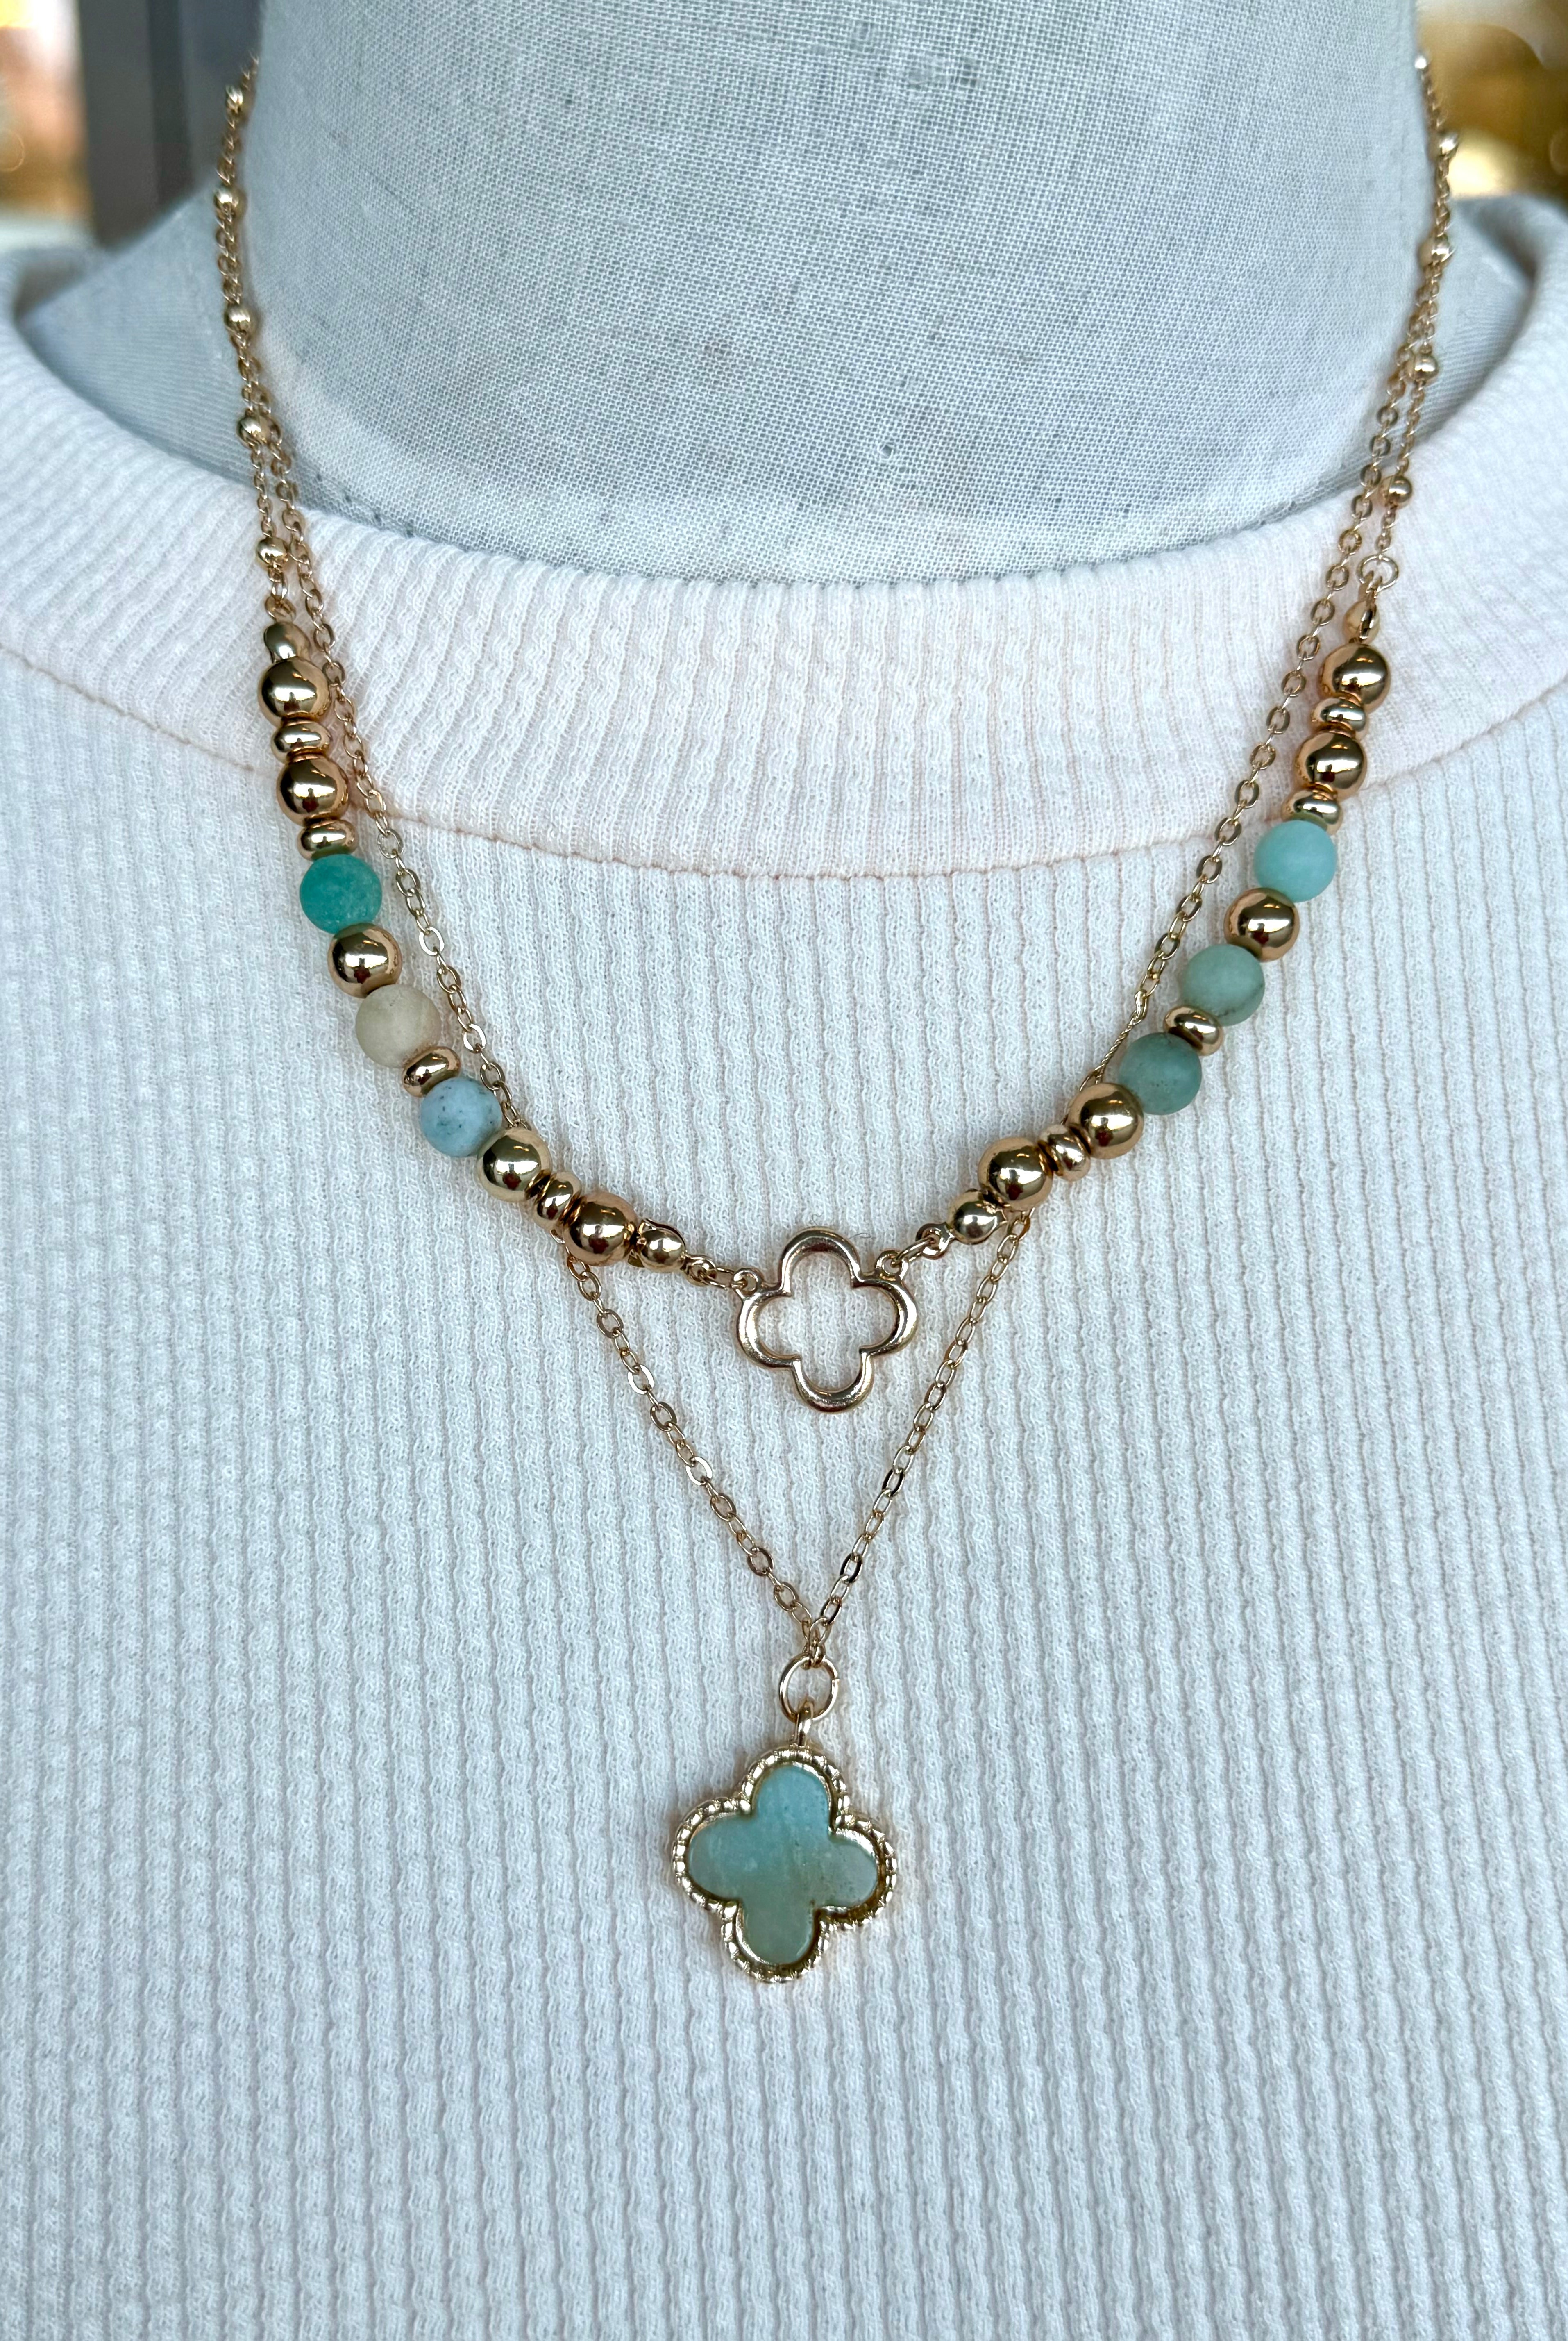 Salt Water Clover Necklace-The Lovely Closet-The Lovely Closet, Women's Fashion Boutique in Alexandria, KY